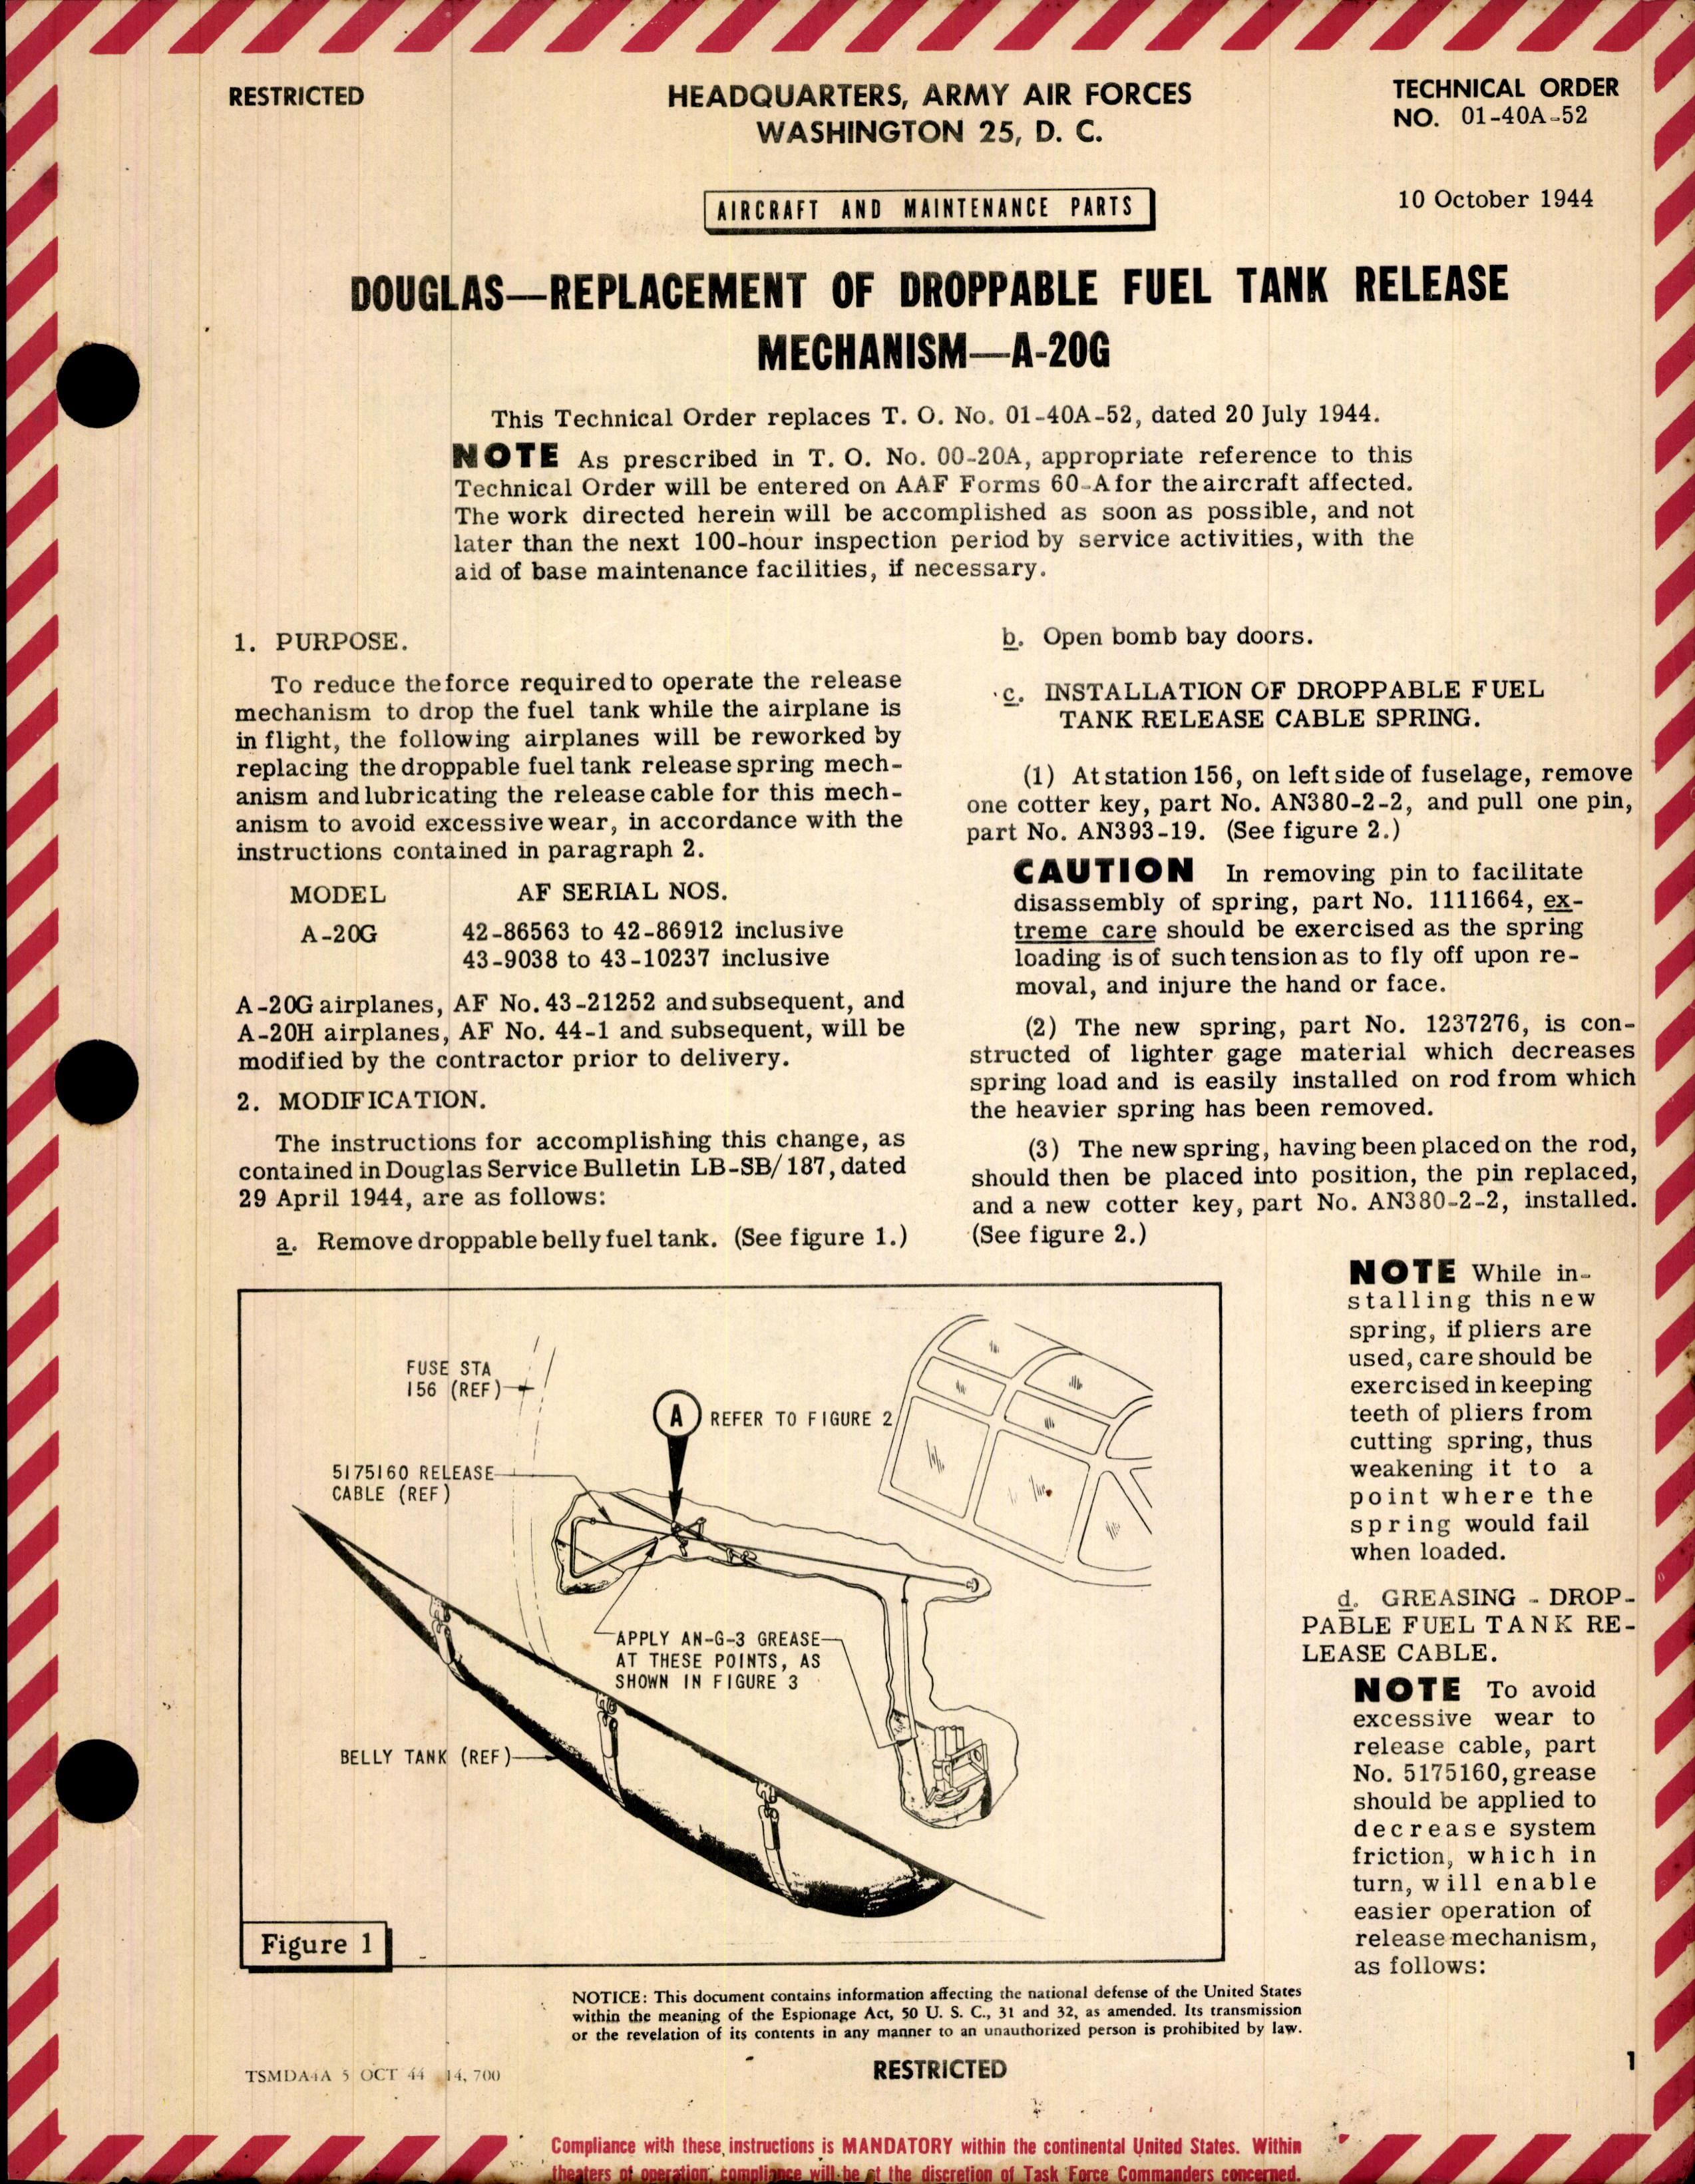 Sample page 1 from AirCorps Library document: Replacement of Droppable Fuel Tank Release Mechanism for A-20G